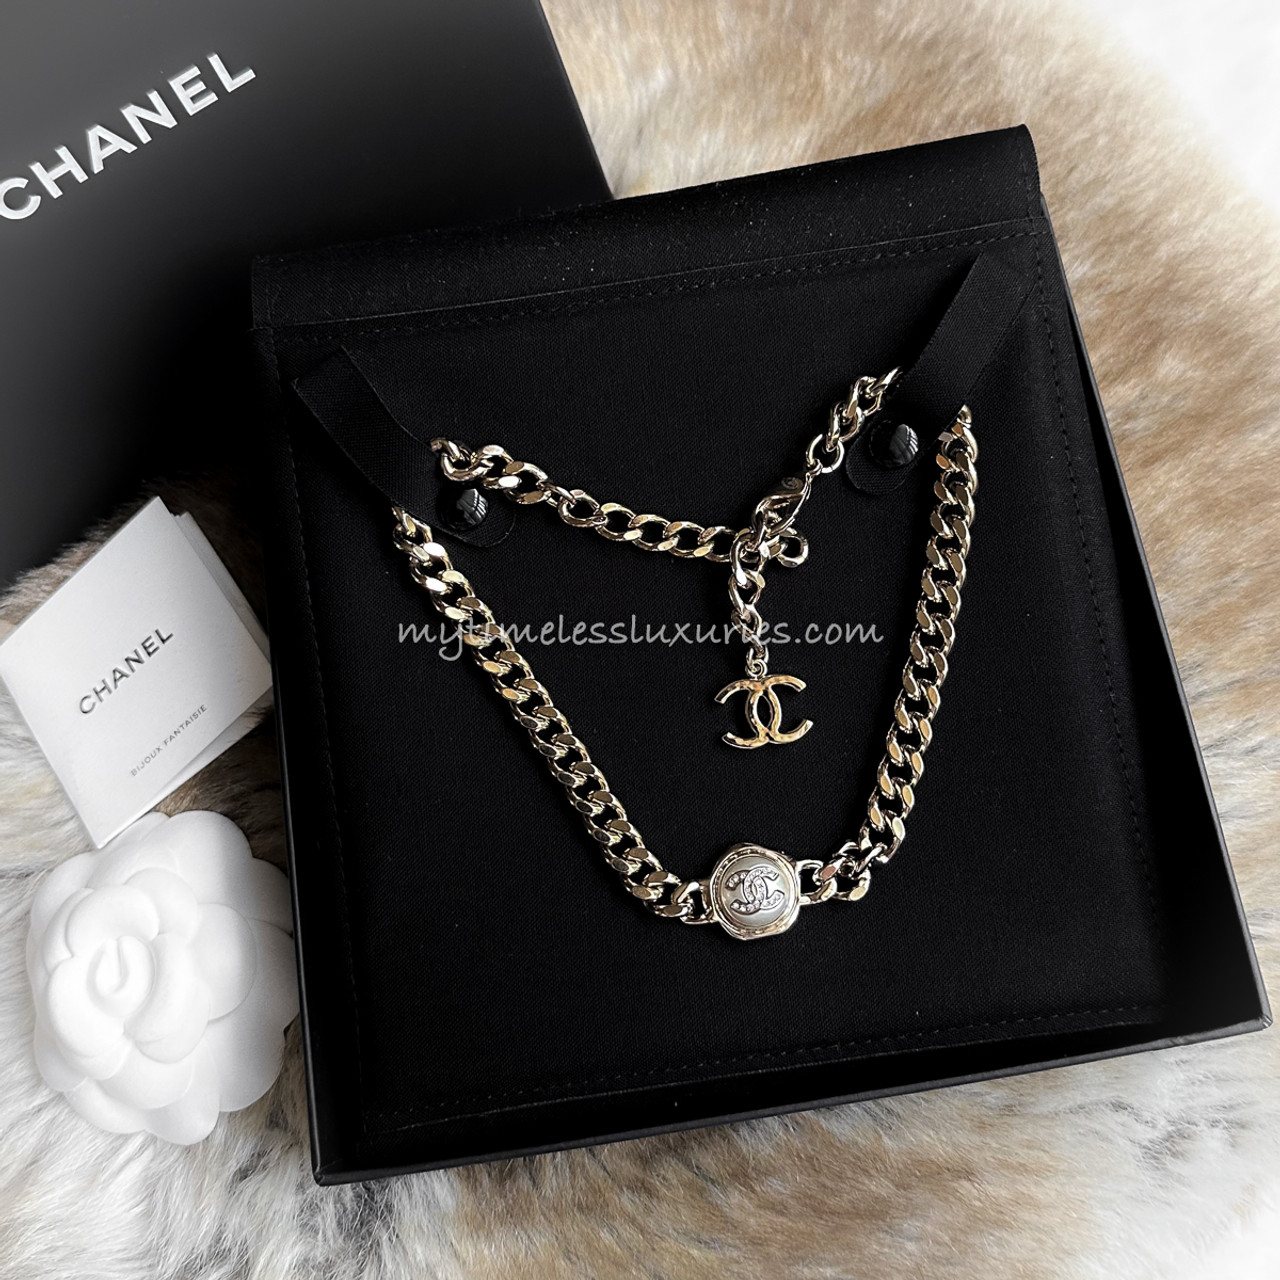 Chanel RARE Multi Strand CC Necklace Long Limited Edition | My Site